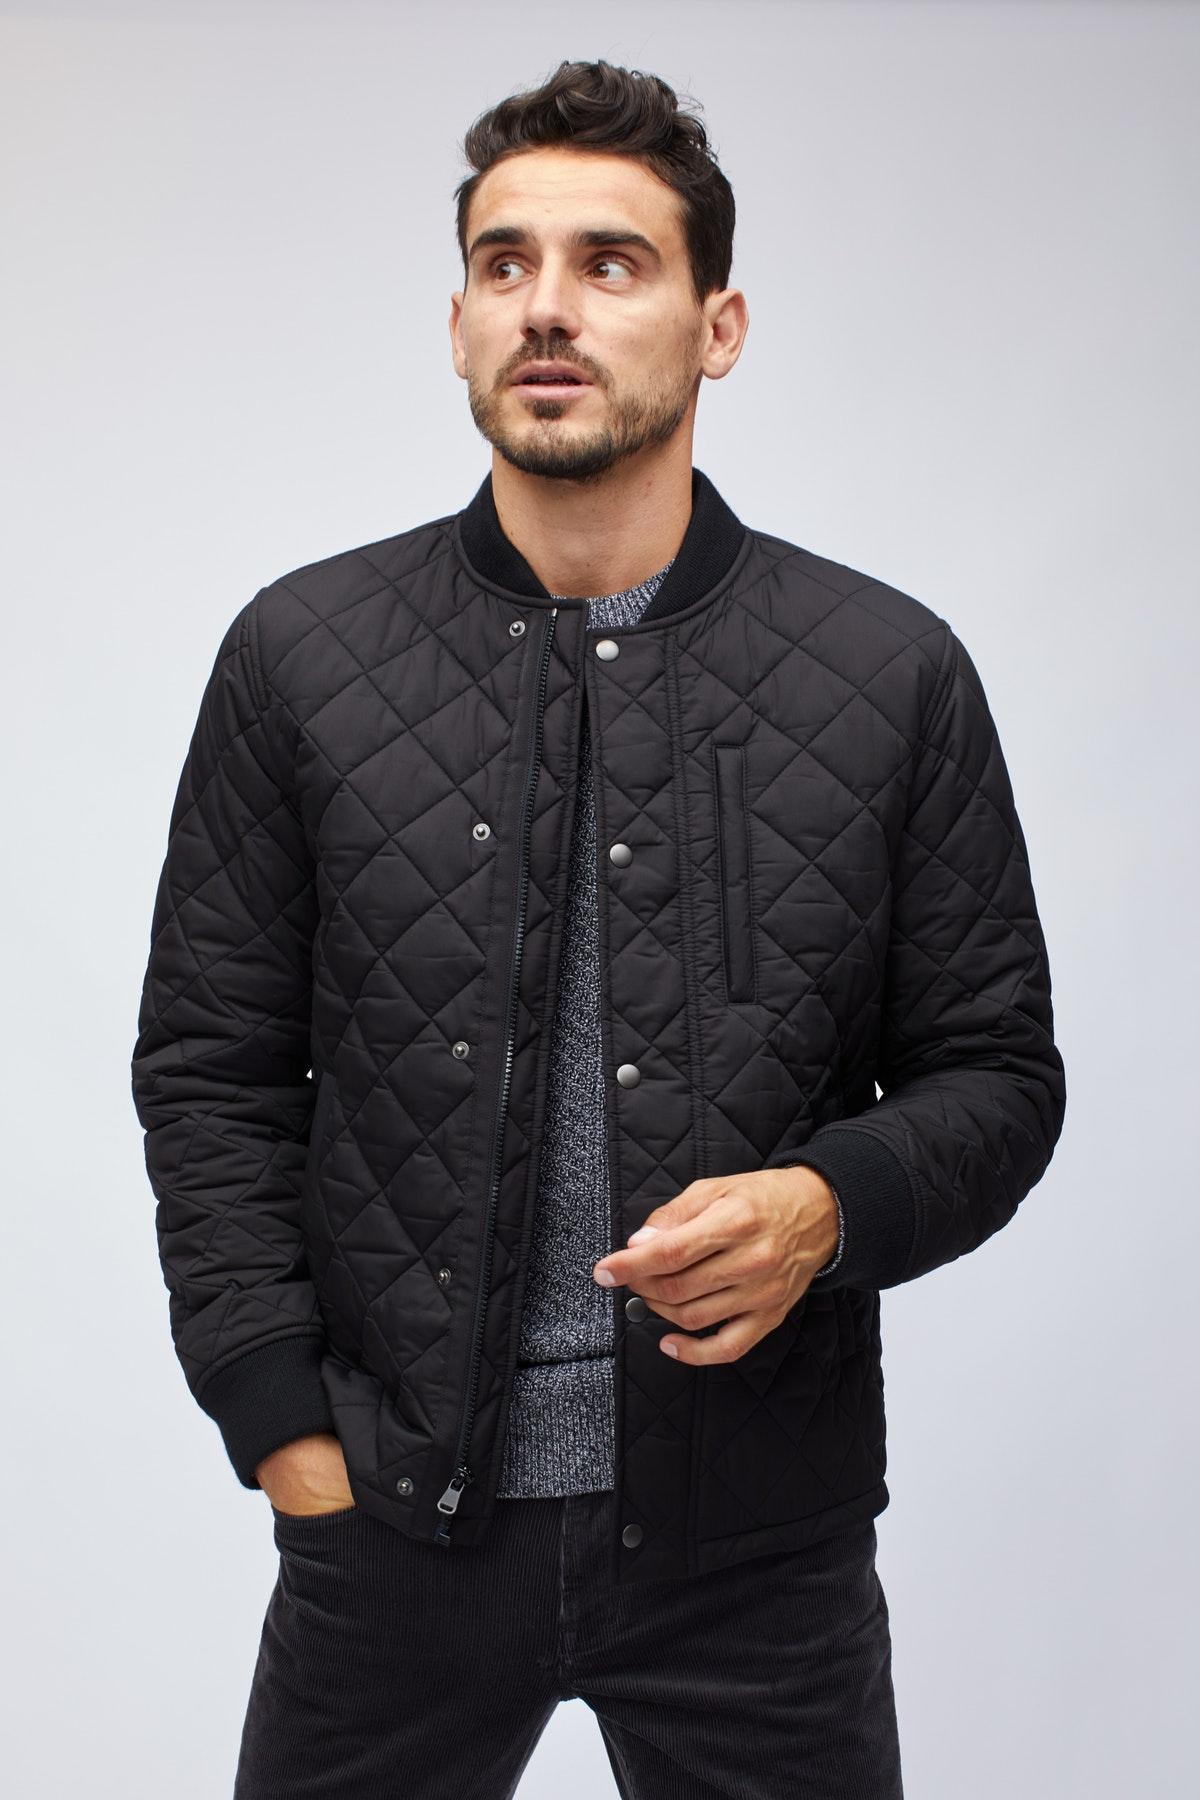 Bonobos Synthetic The Quilted Bomber in Black for Men - Lyst